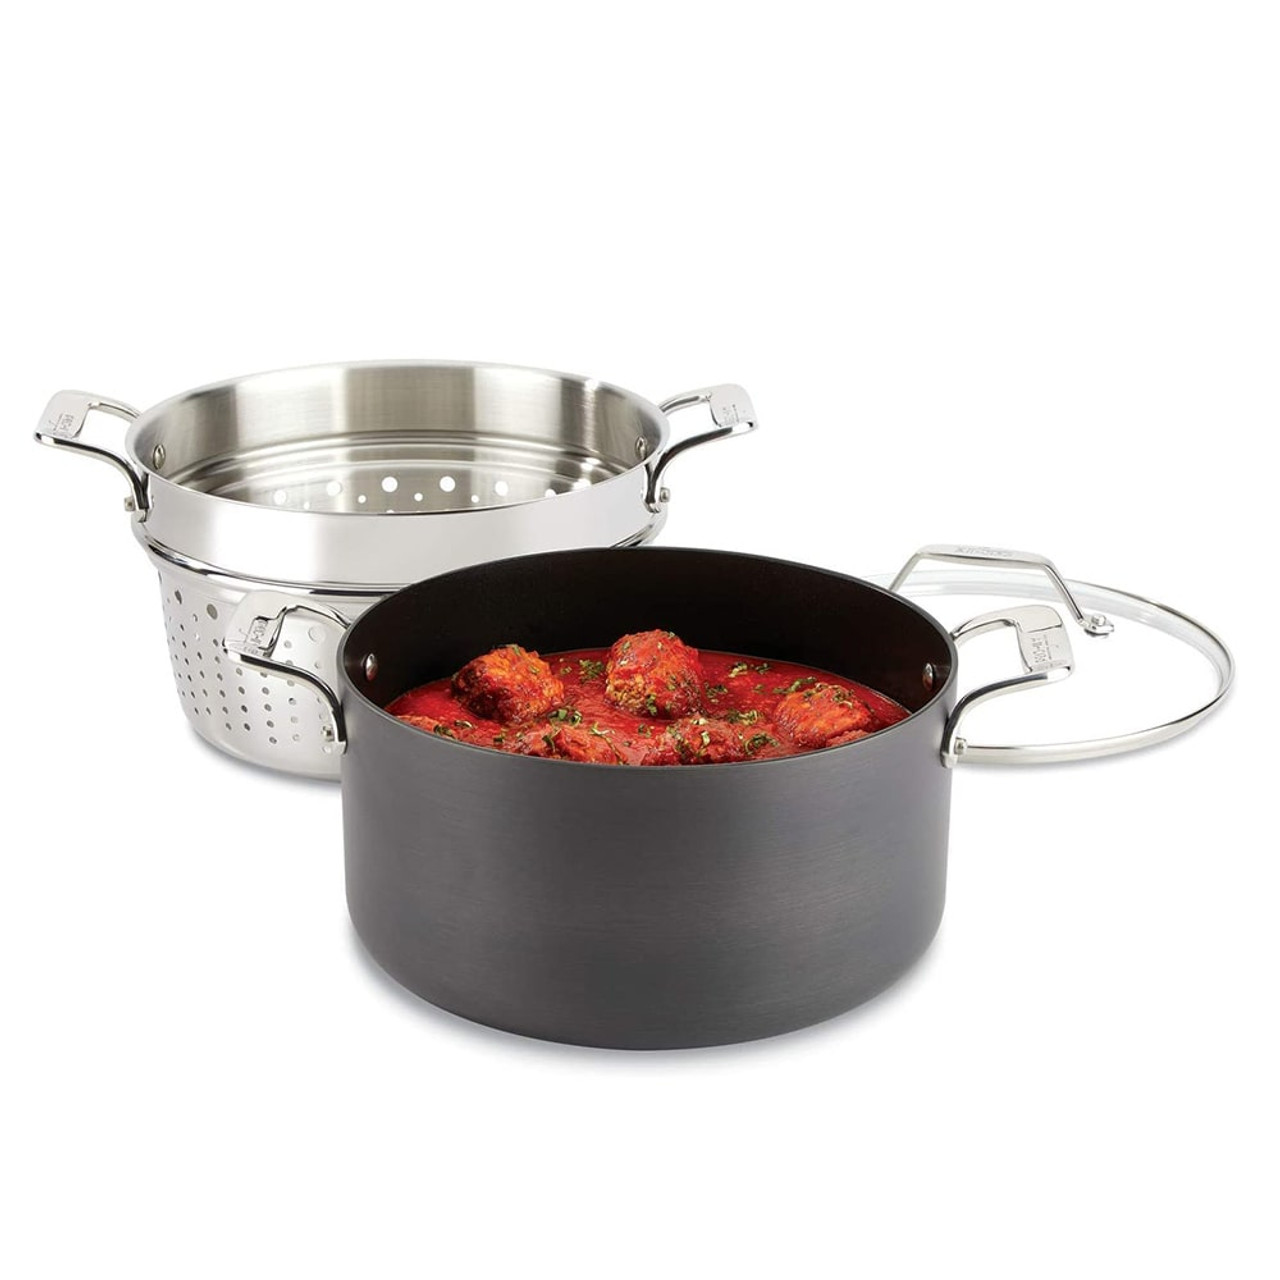 All-Clad Nonstick Cookware Is Up to 49% Off on